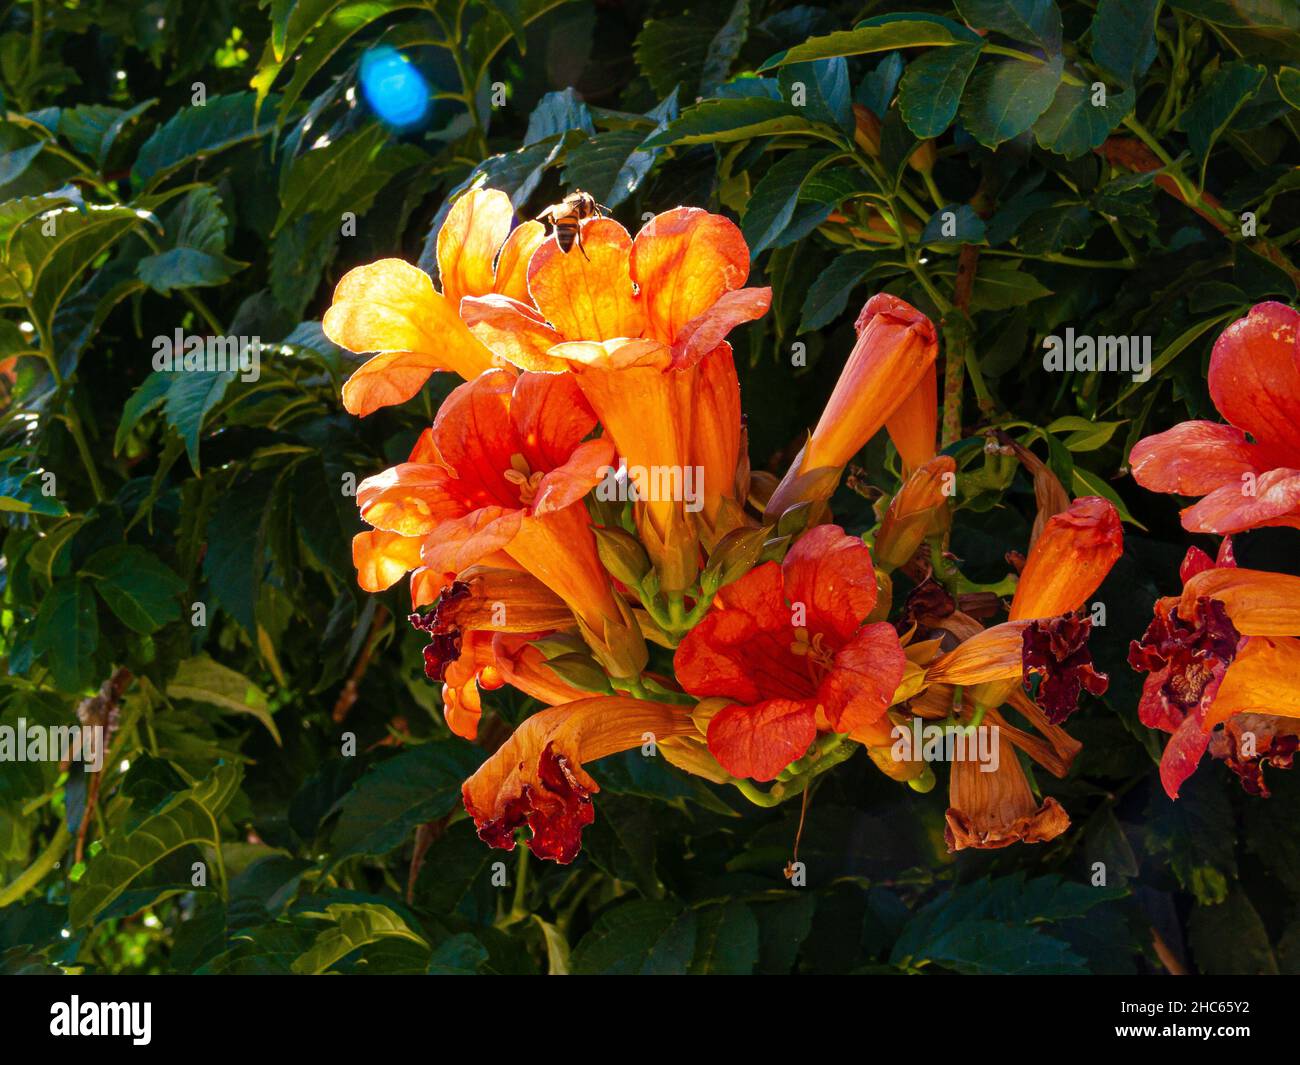 Shrub of Campsis radicans with bright trumpet-shaped flowers Stock Photo